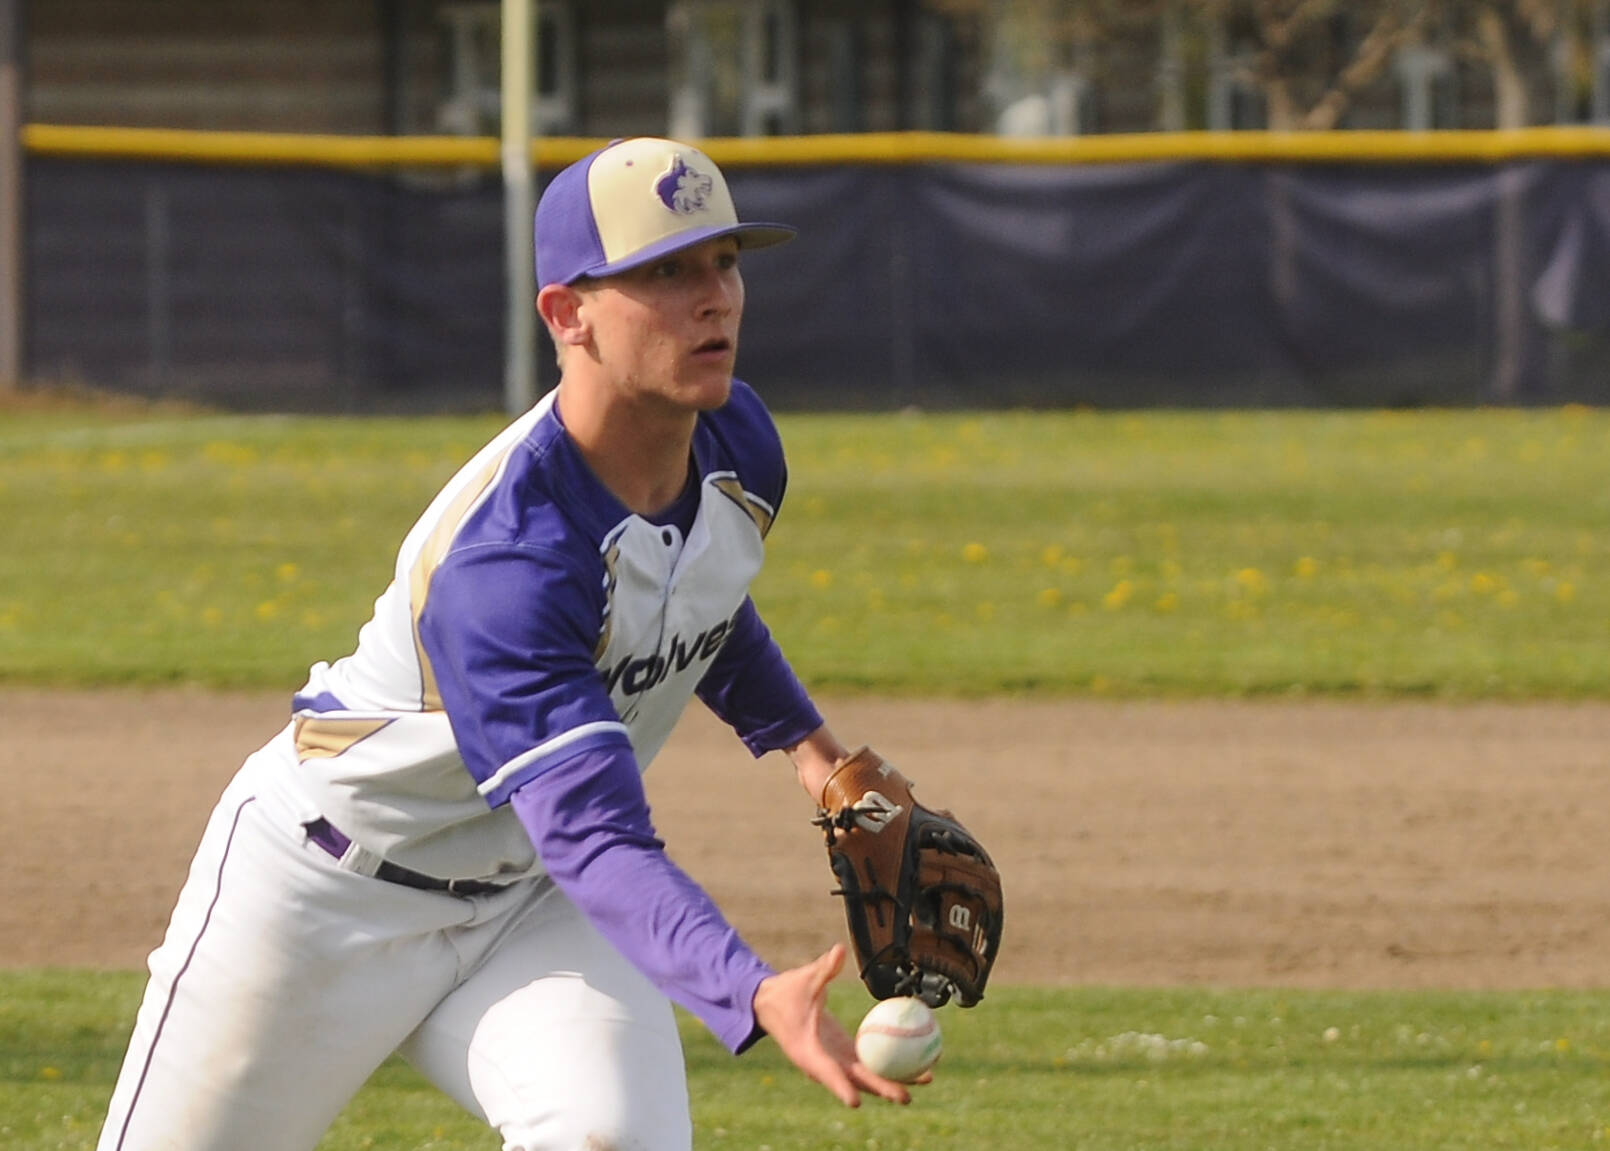 Sequim Gazette photo by Michael Dashiell
Sequim pitcher Connor Bear fields a grounder and throws out a North Mason batter in the Wolves’ 5-1 win on April 28. Bear threw five shutout innings in the Wolves’ 5-1 win.